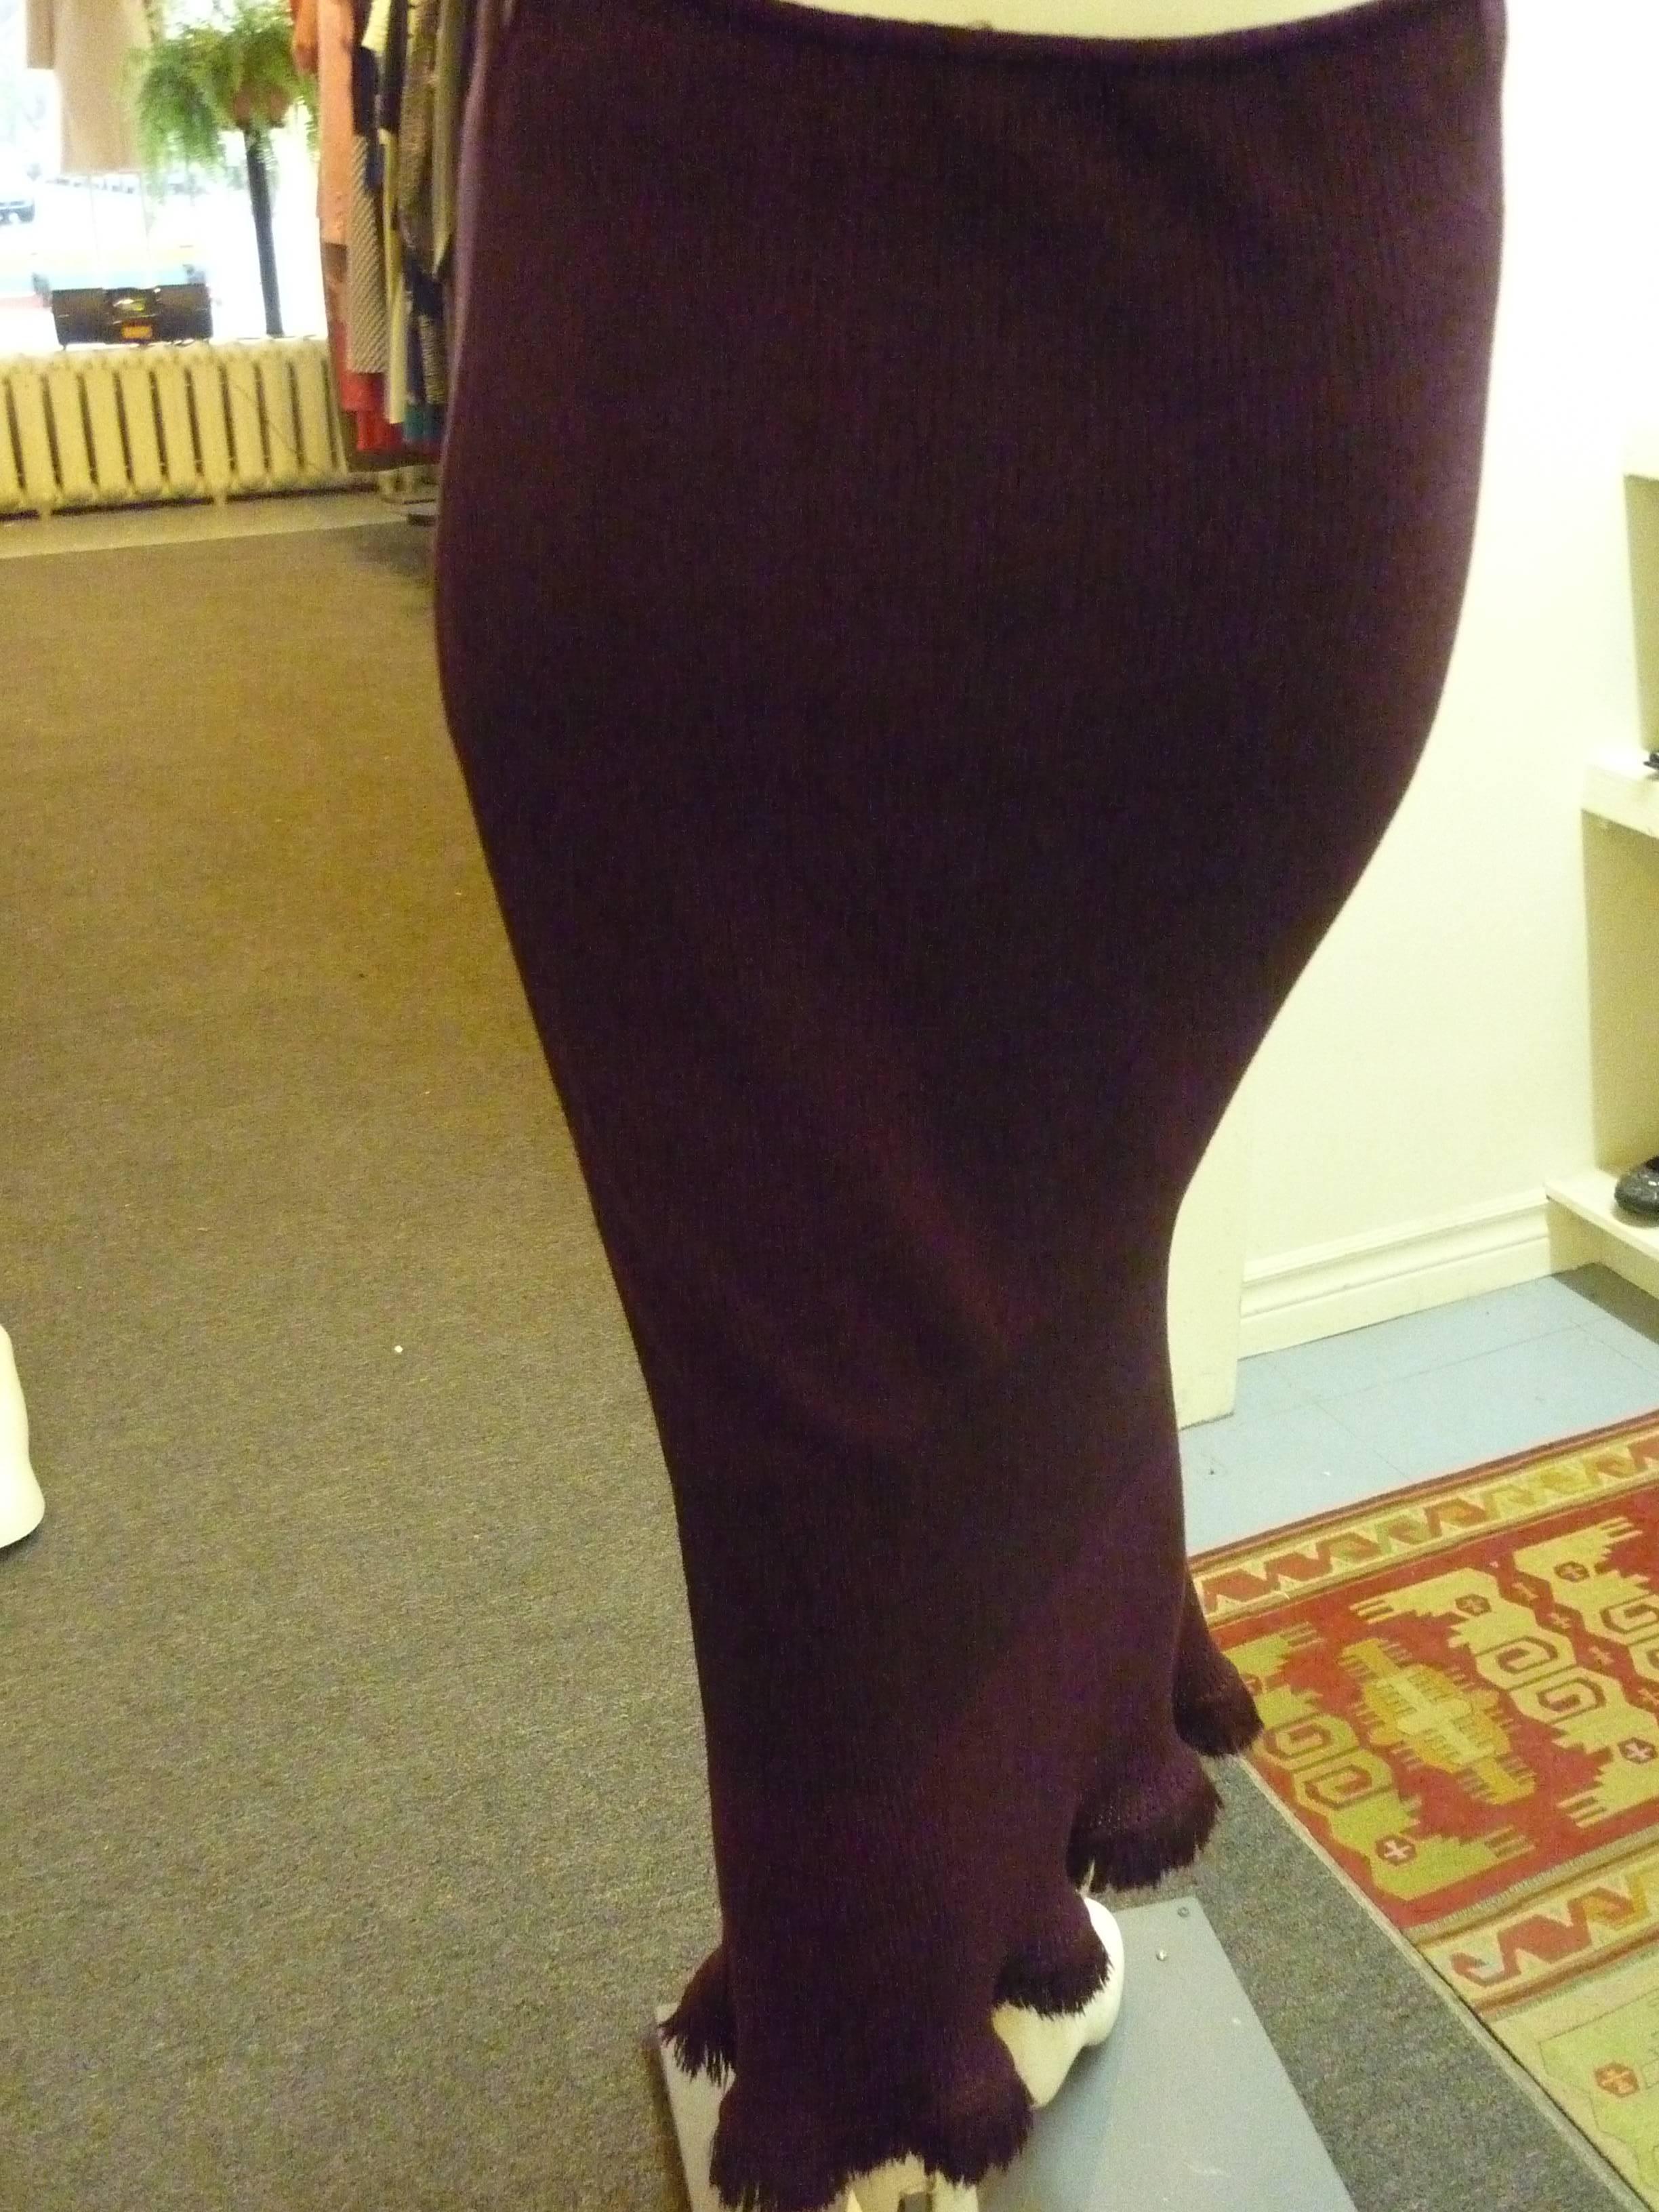 Lovely 50/50 wool and rayon skirt. The material is ribbed with three different patterns, the middle one having the feel of a bandeau and a slightly deeper aubergine color.

The bottom part of the skirt has a bit of an a-line as well as wispy wool